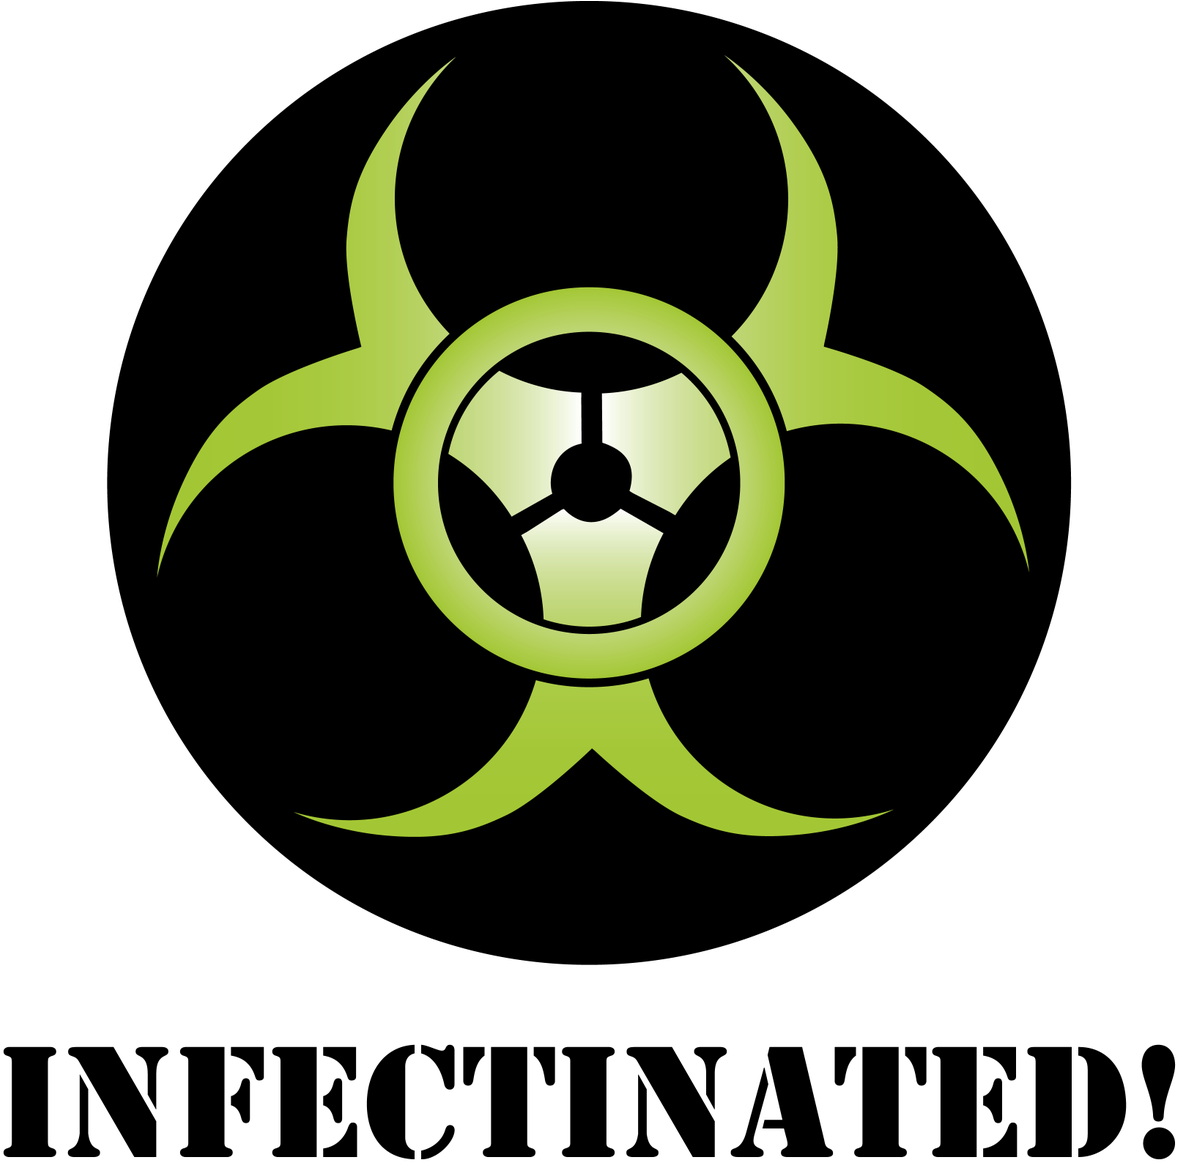 Quickly Drew A Biohazard Symbol Whilst Waiting For